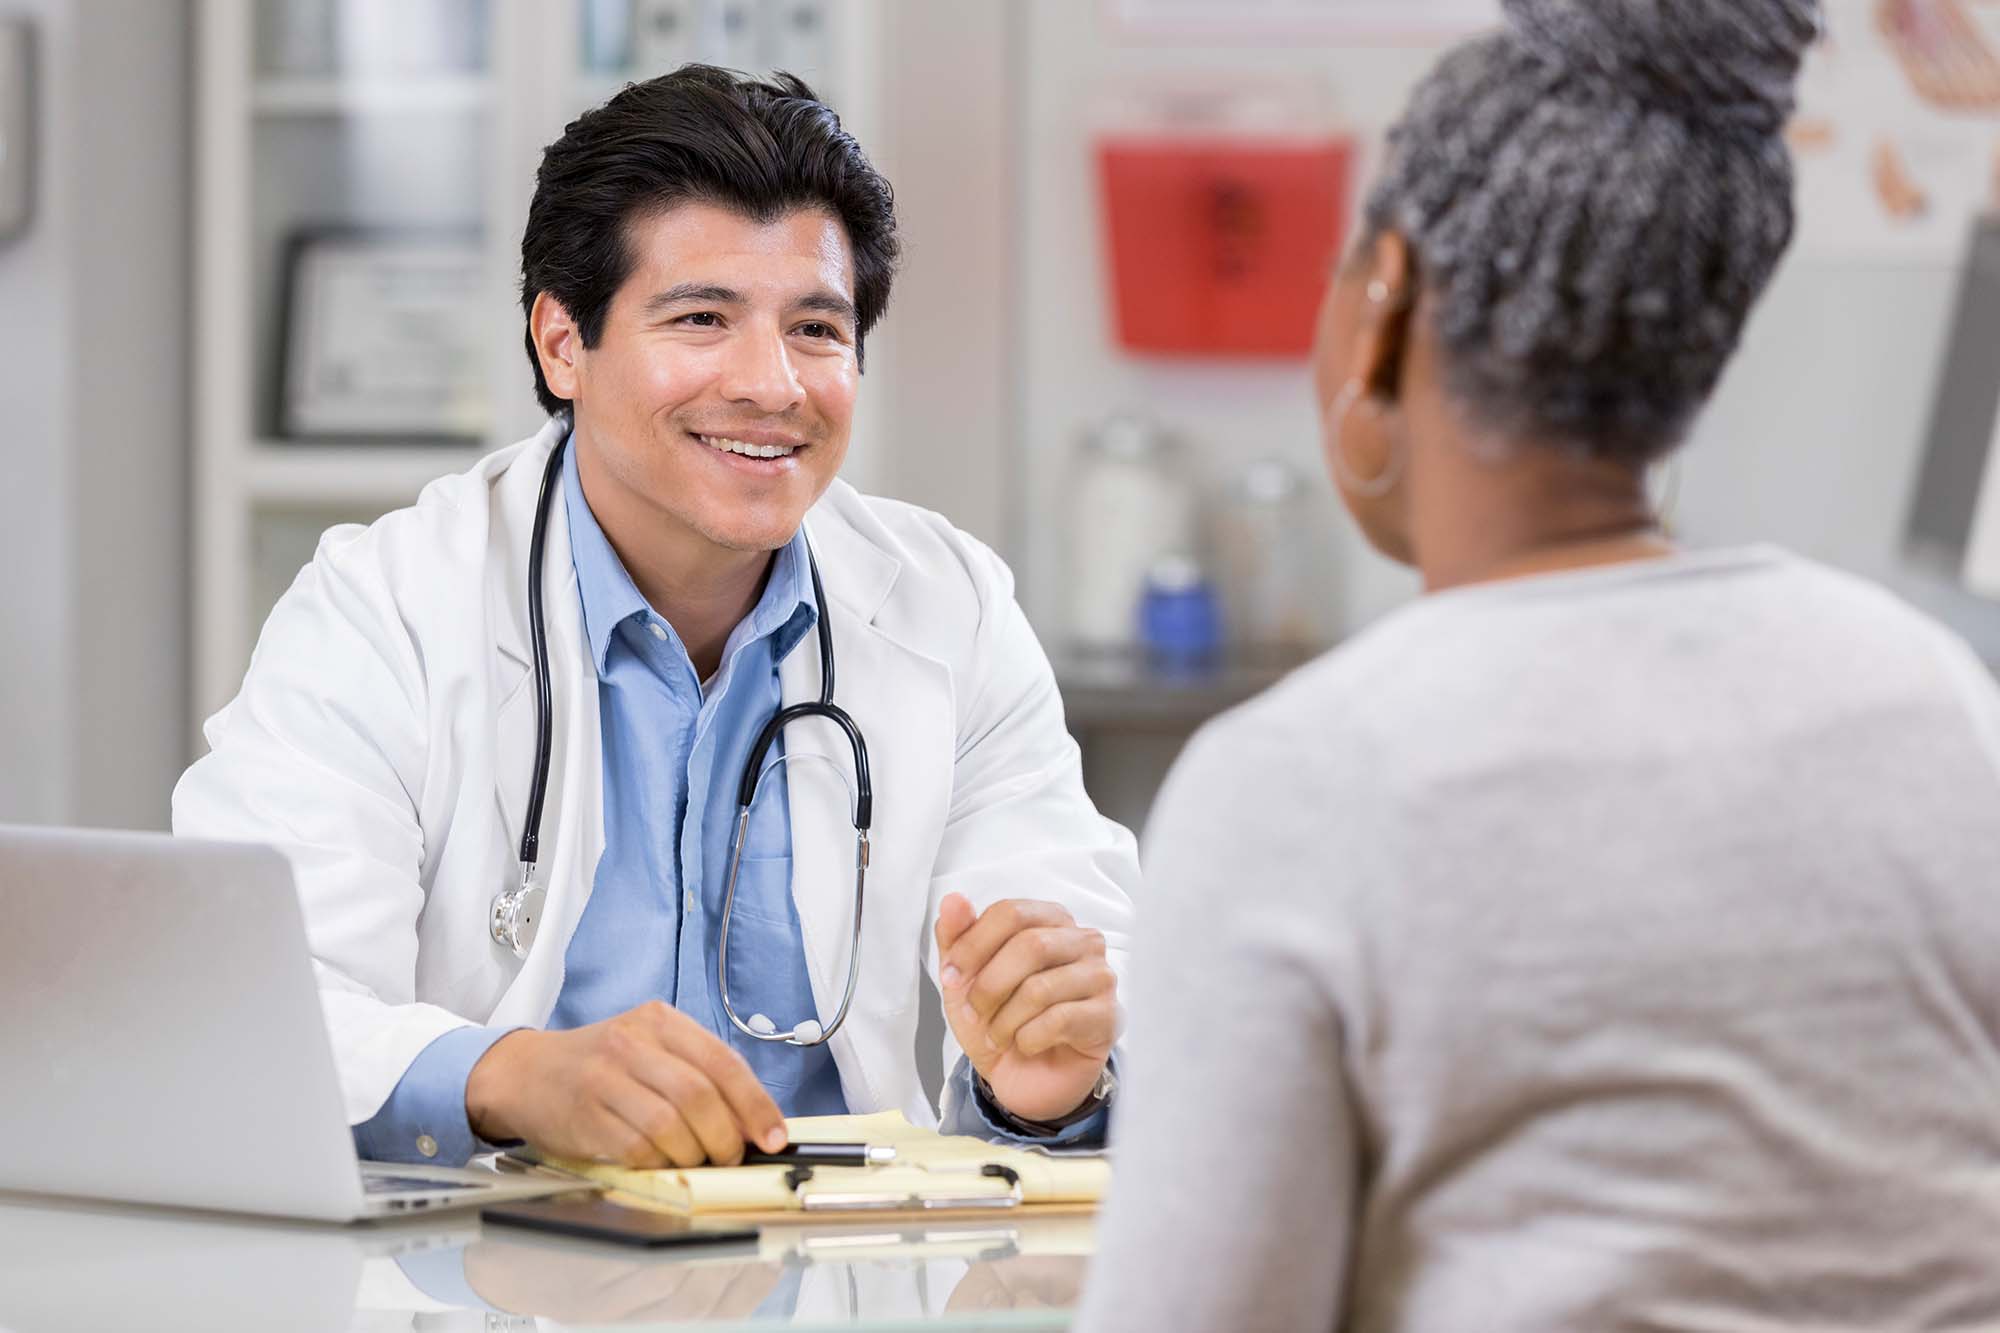 Generic stock photo of a doctor.